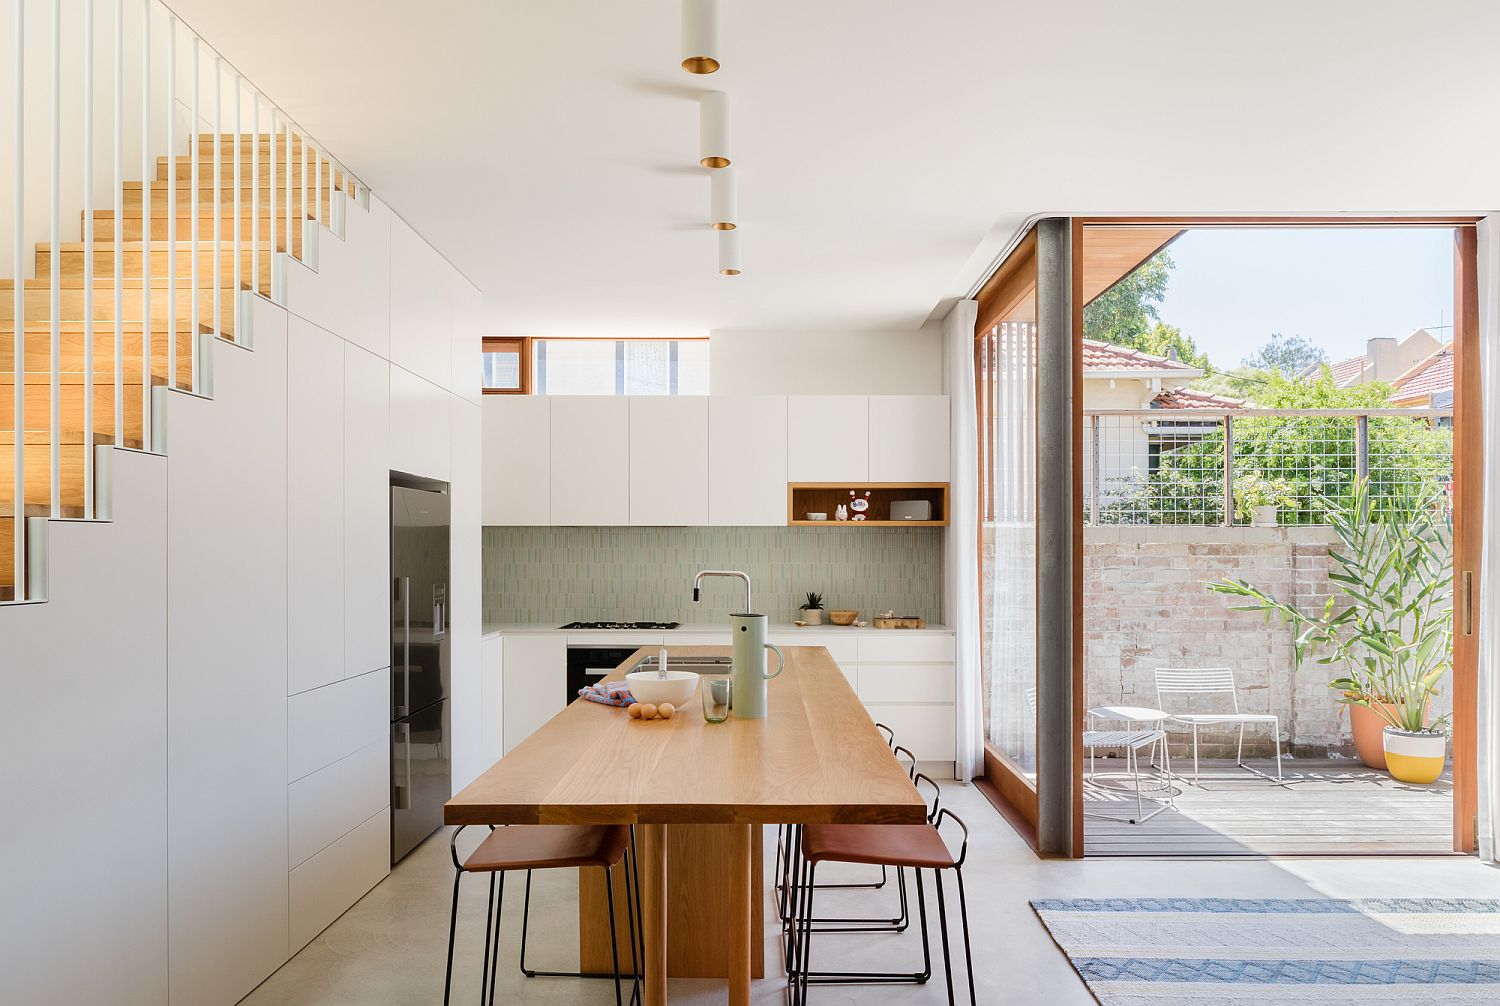 White-and-wood-kitchen-and-dining-area-of-the-Machiya-House